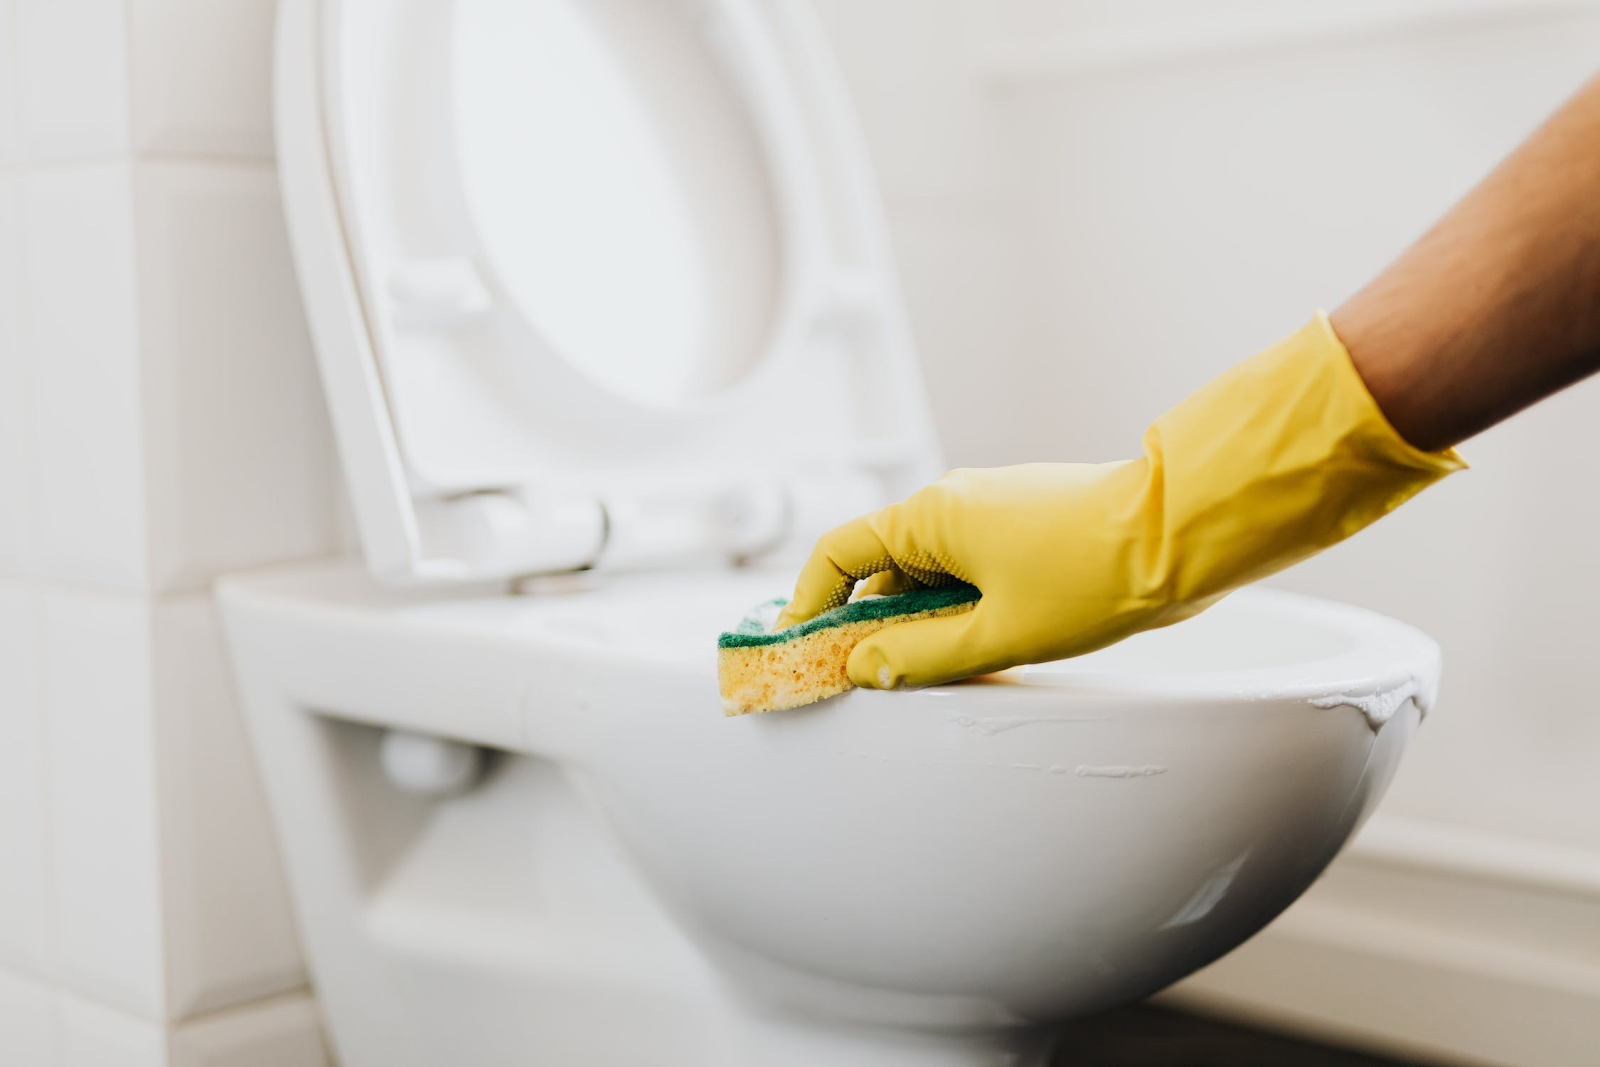 How to clean limescale from toilet